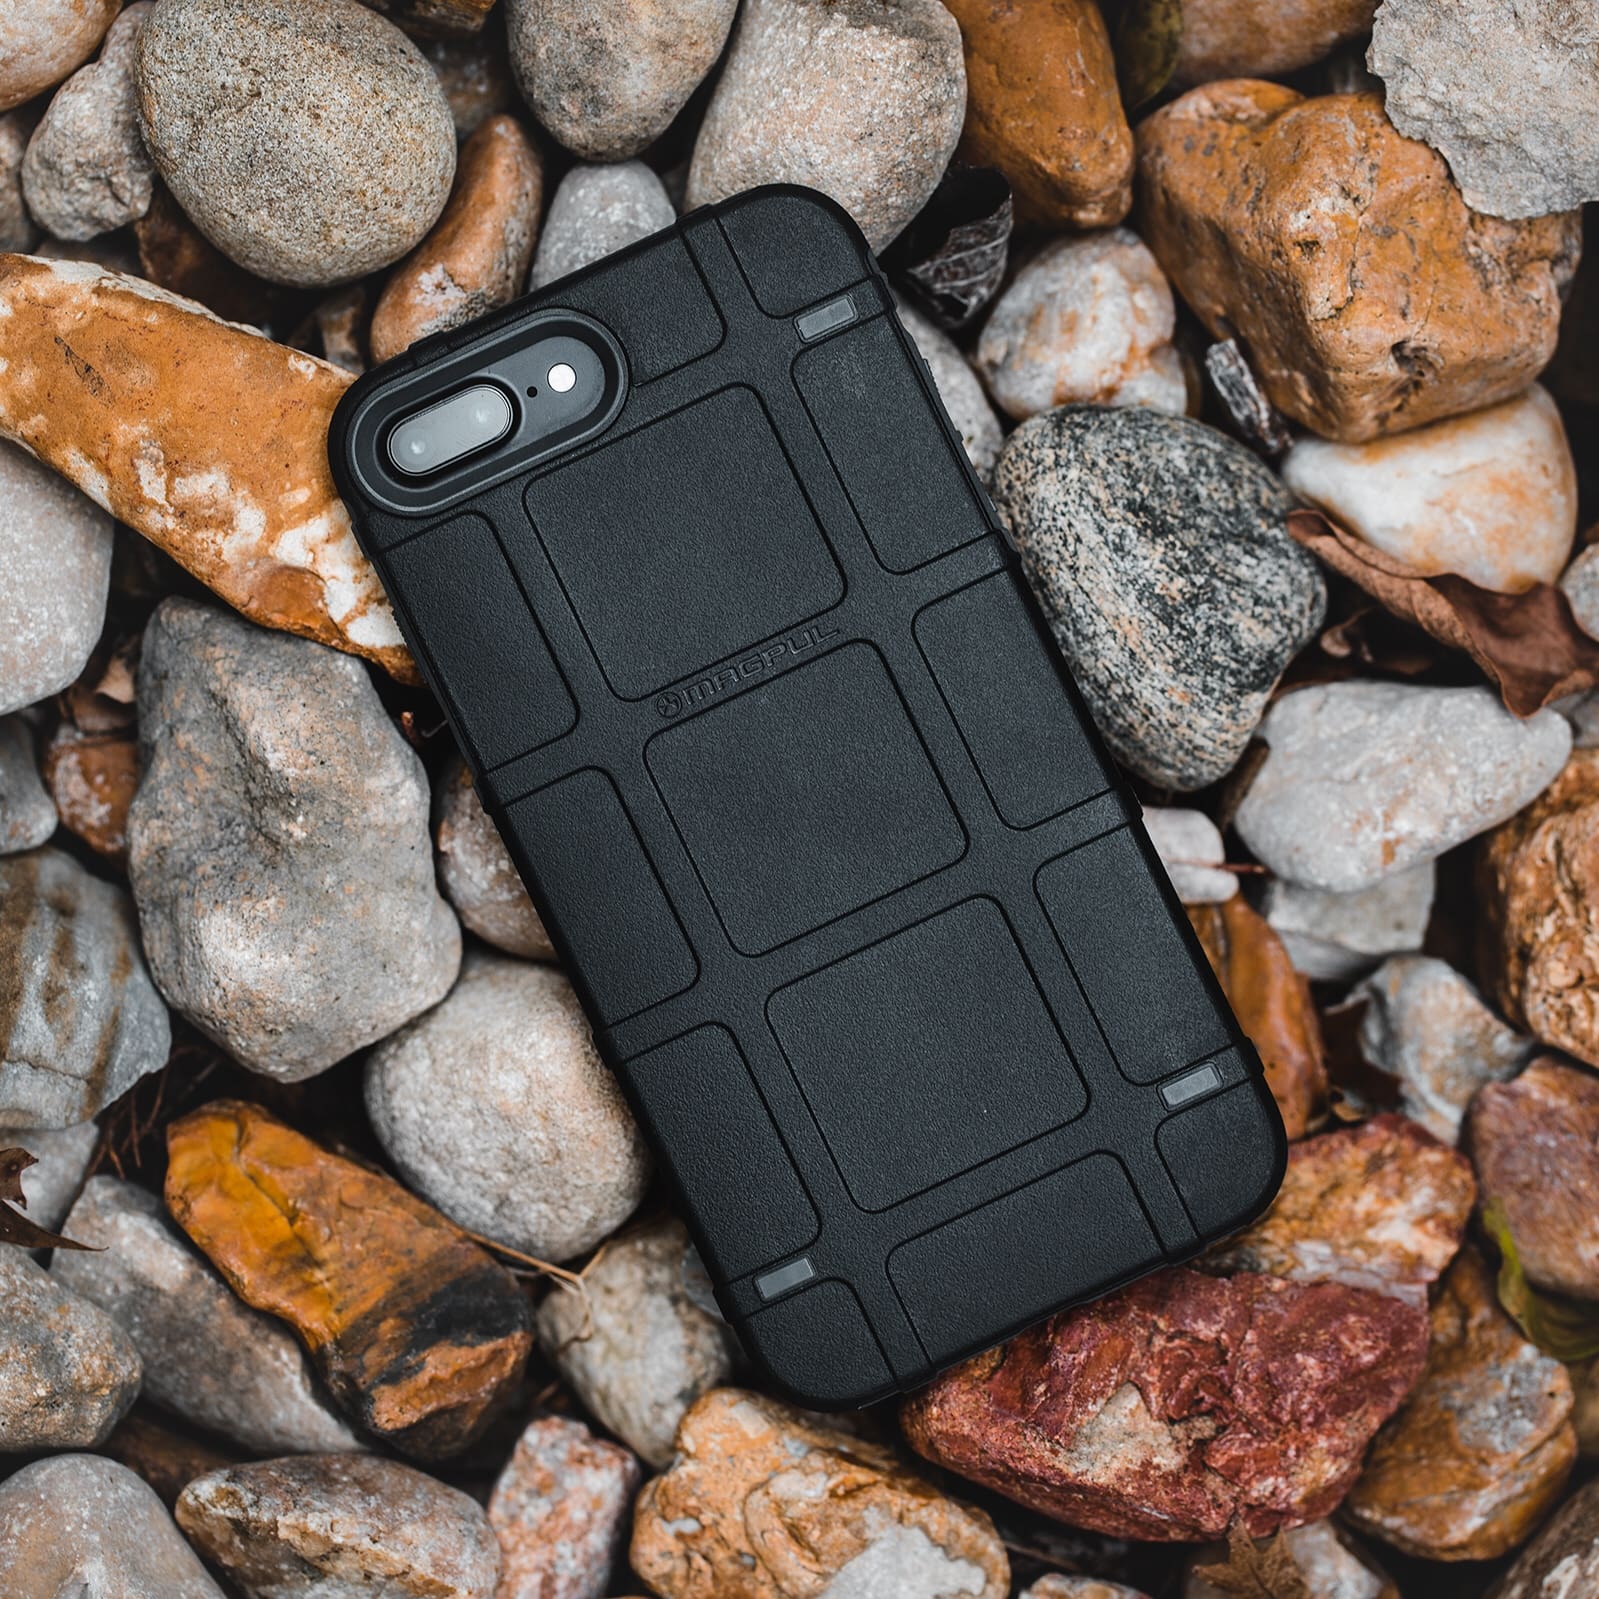 Magpul Announces Iphone 7 8 7 8 Samsung S 9 S9 Bump Cases Along With Mp5 Hk94 Products Soldier Systems Daily